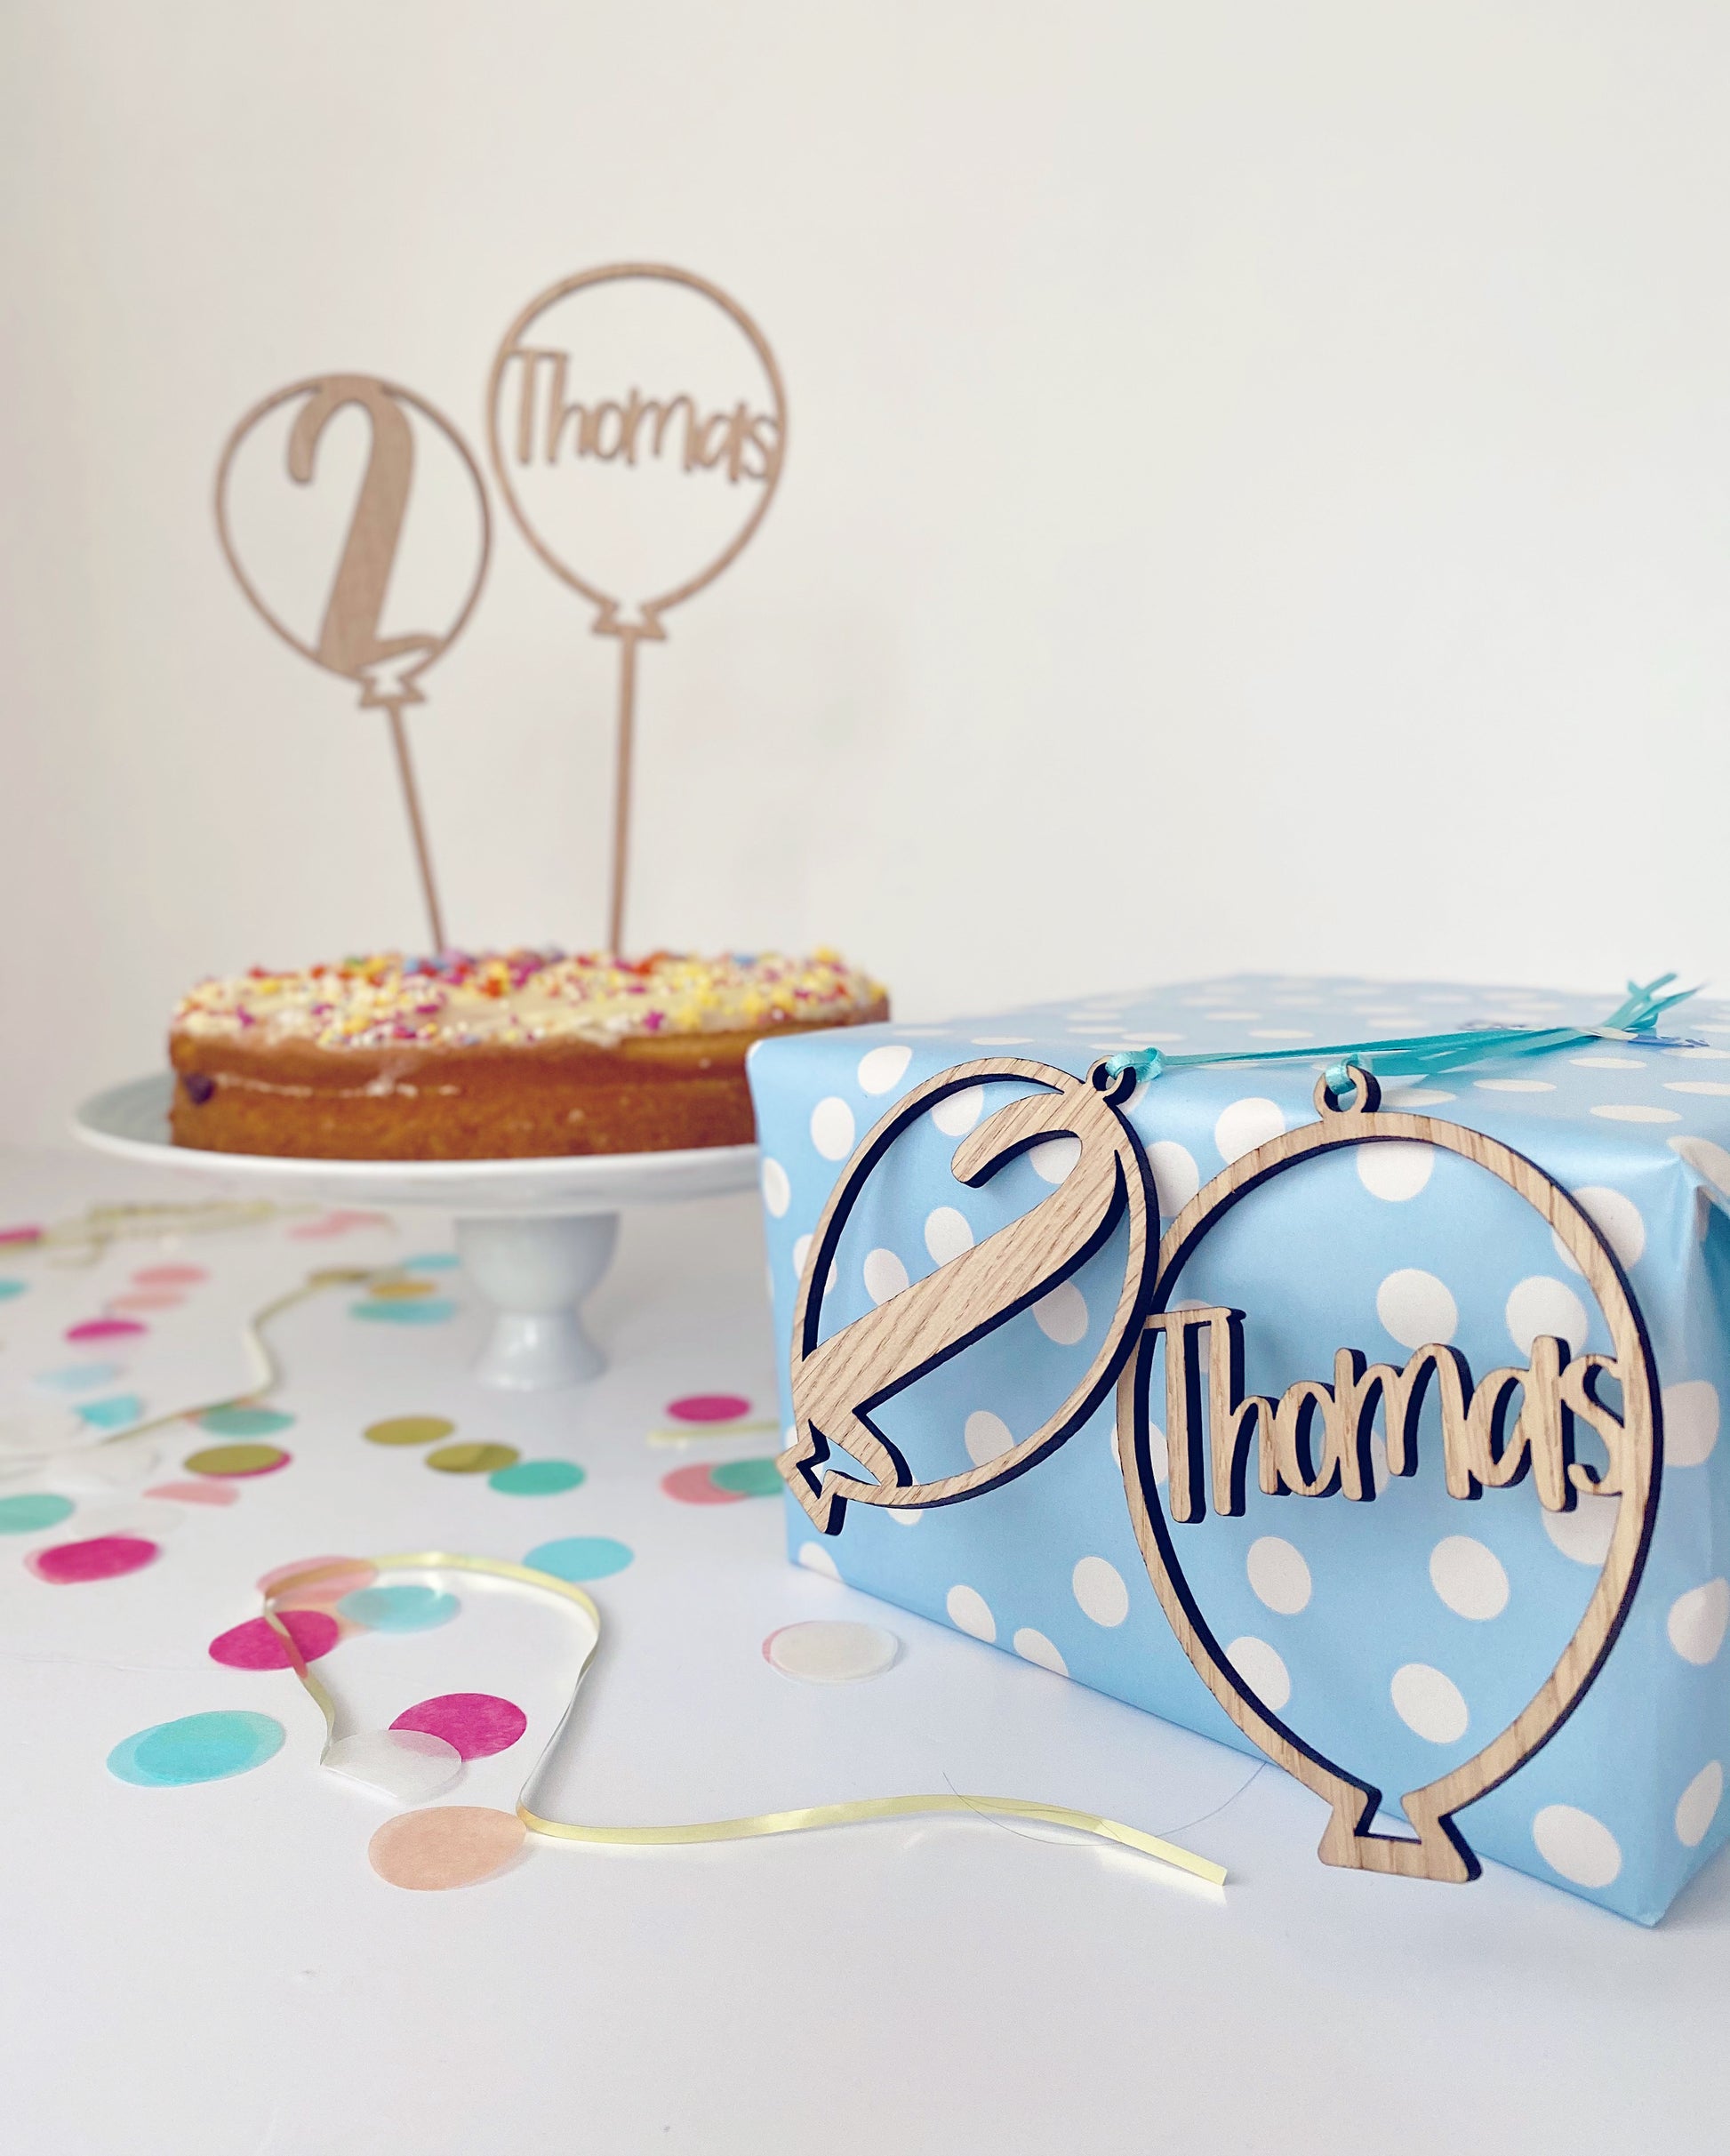 personalised birthday gift tags laser cut from wood in a balloon shape with the age and name cut out of the middle